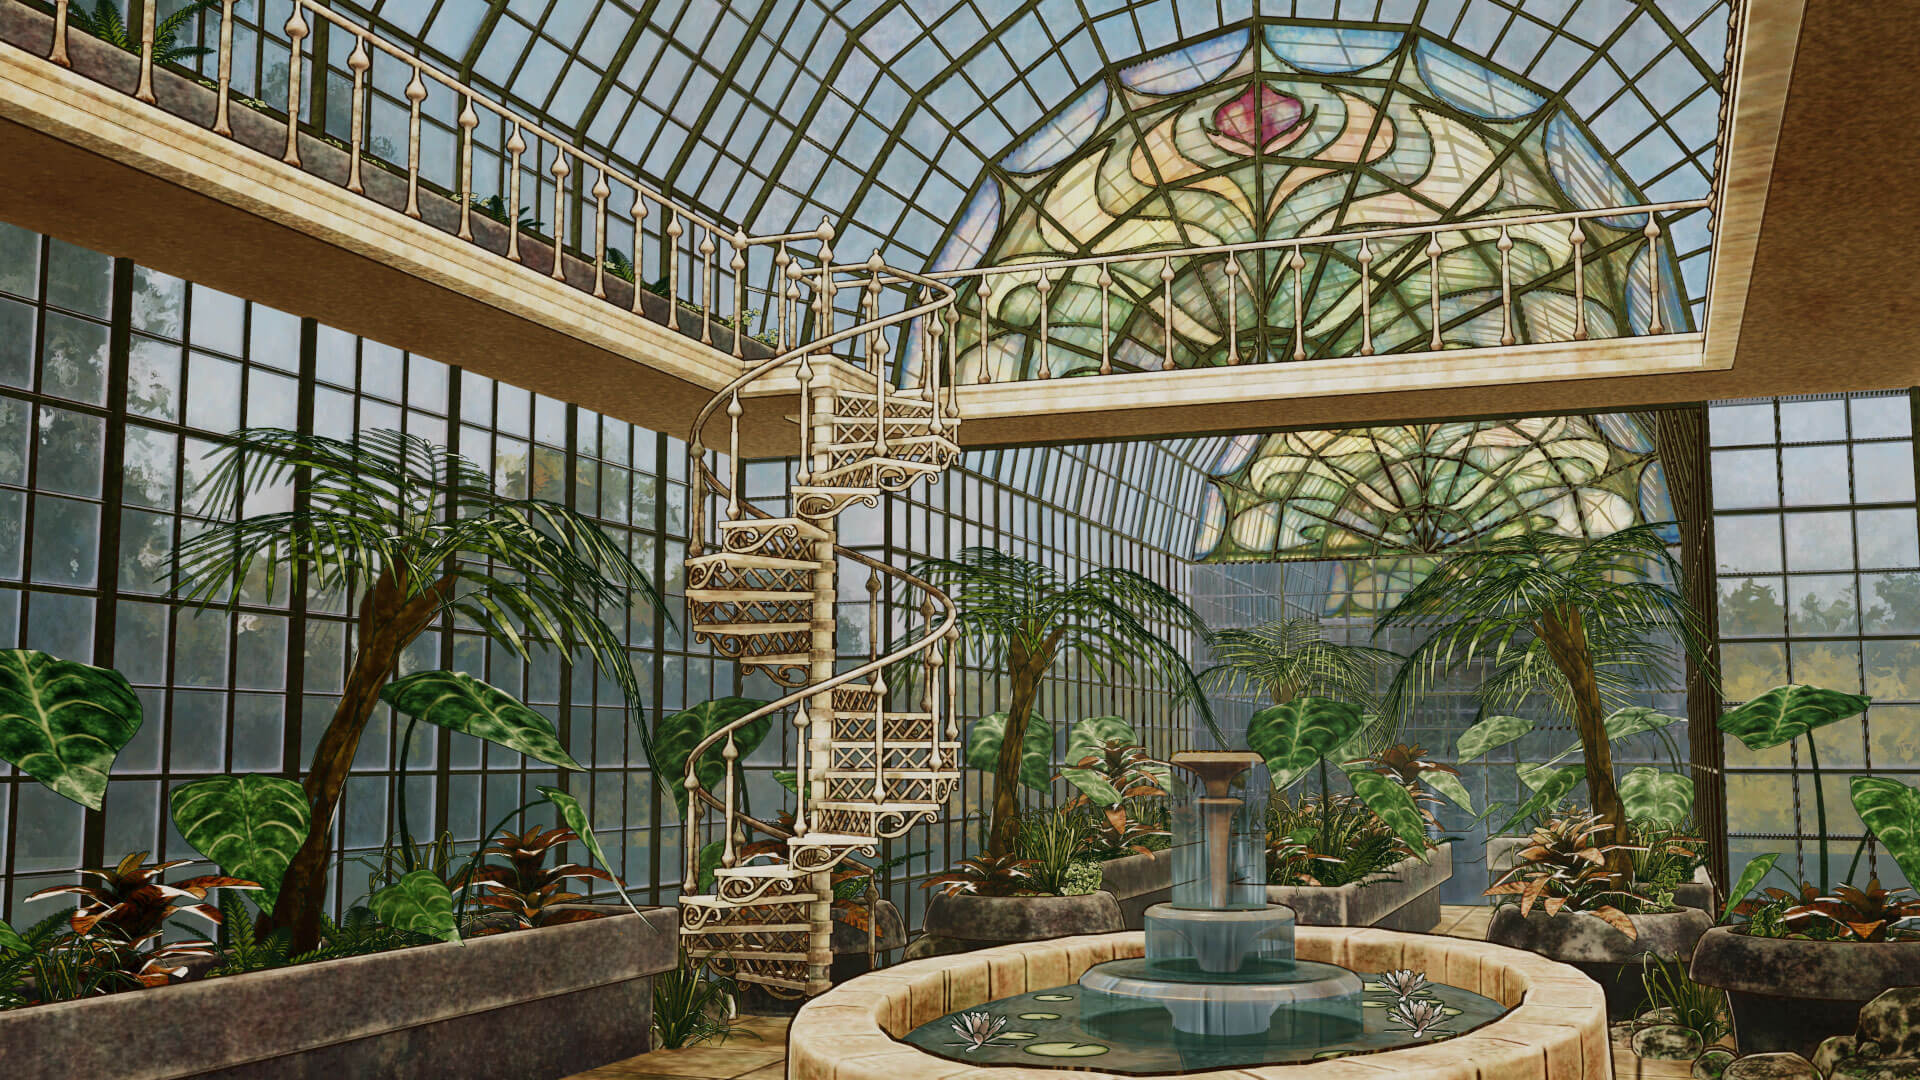 A large greenhouse with exotic plants, a fountain, and stained glass.